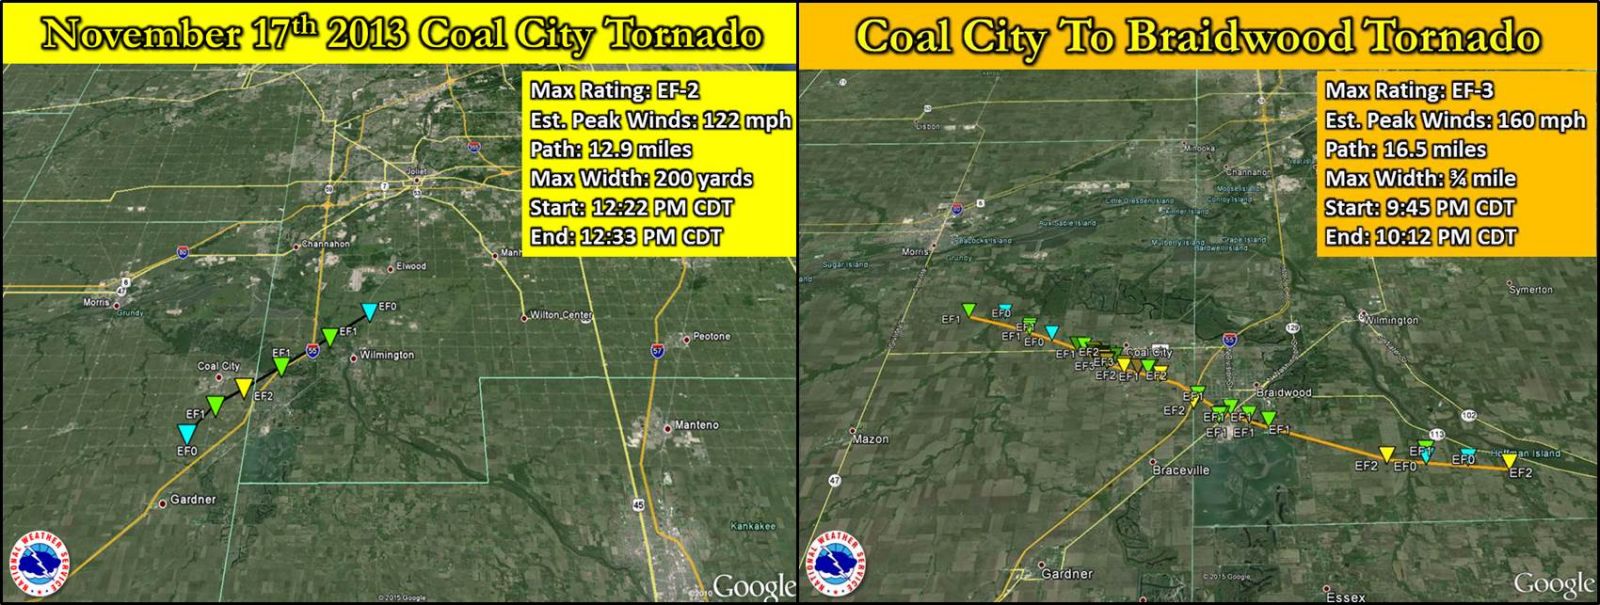 Map showing the Coal City area tornado track of June 22 2015 to the Coal City area tornado track of November 17 2013